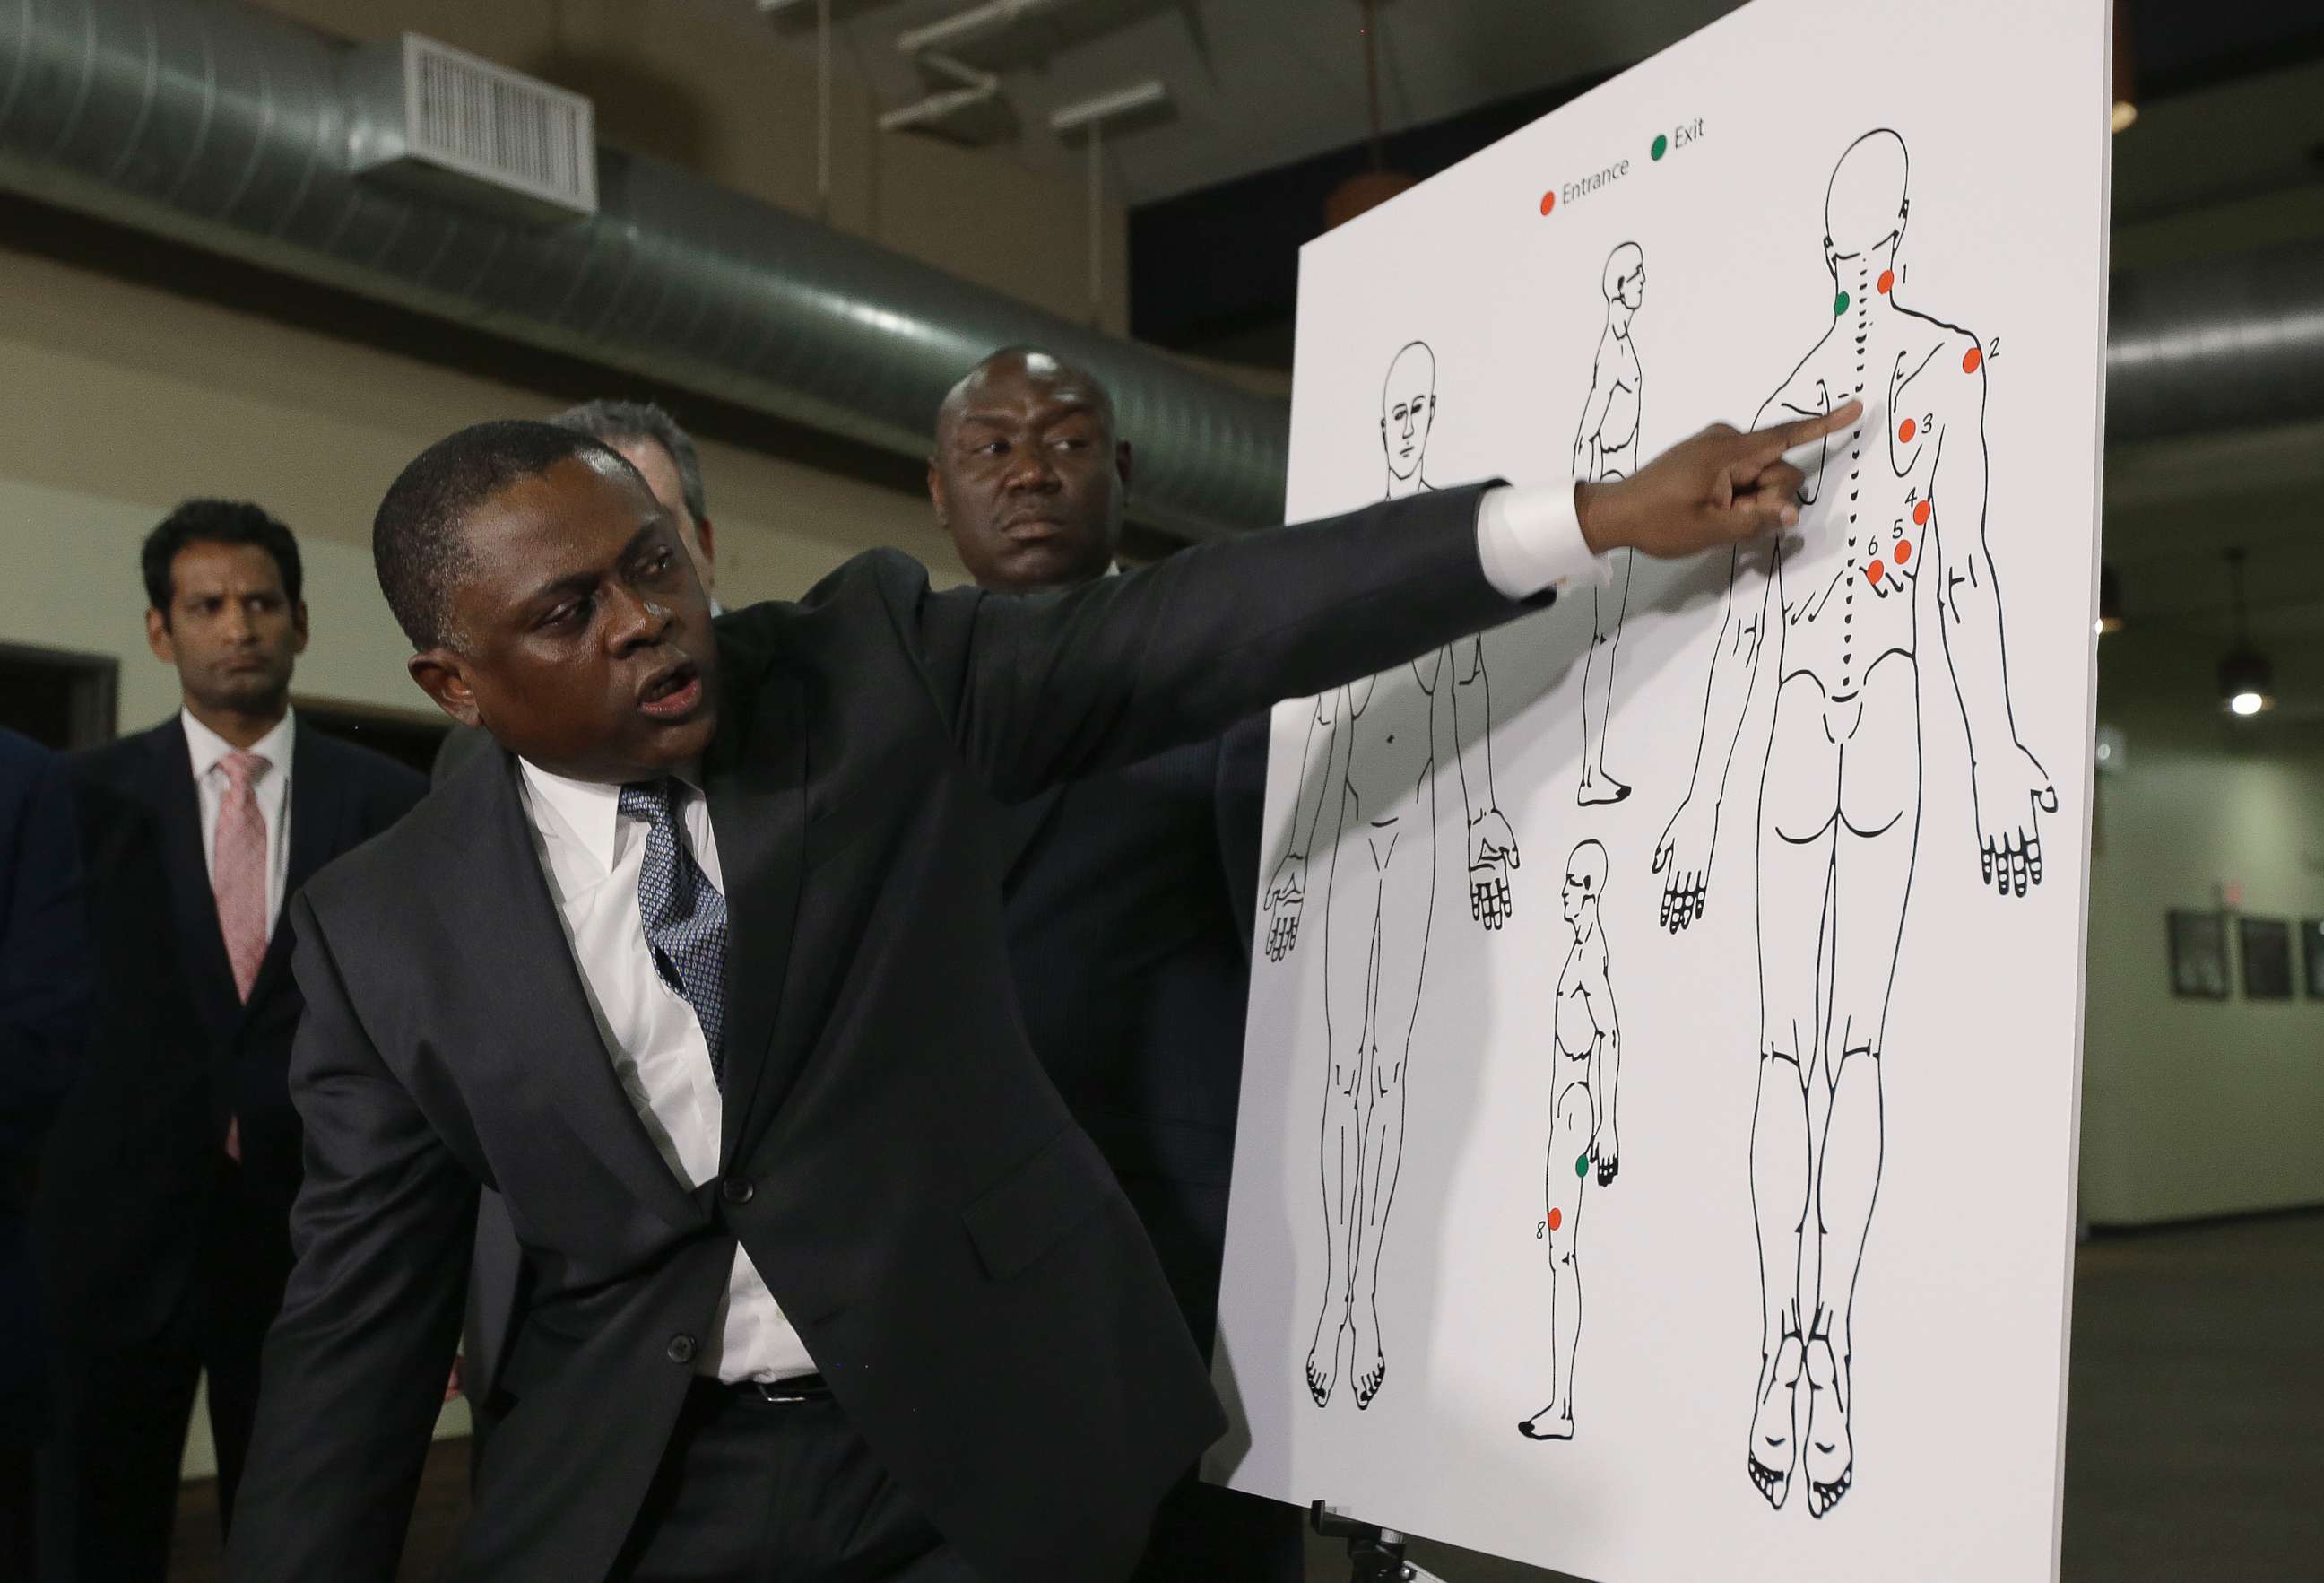 PHOTO: Pathologist, Dr. Bennet Omalu, gestures to a diagram showing the gun shot wounds he found on the body of police shooting victim Stephon Clark, during a news conference Friday, March 30, 2018, in Sacramento, Calif.